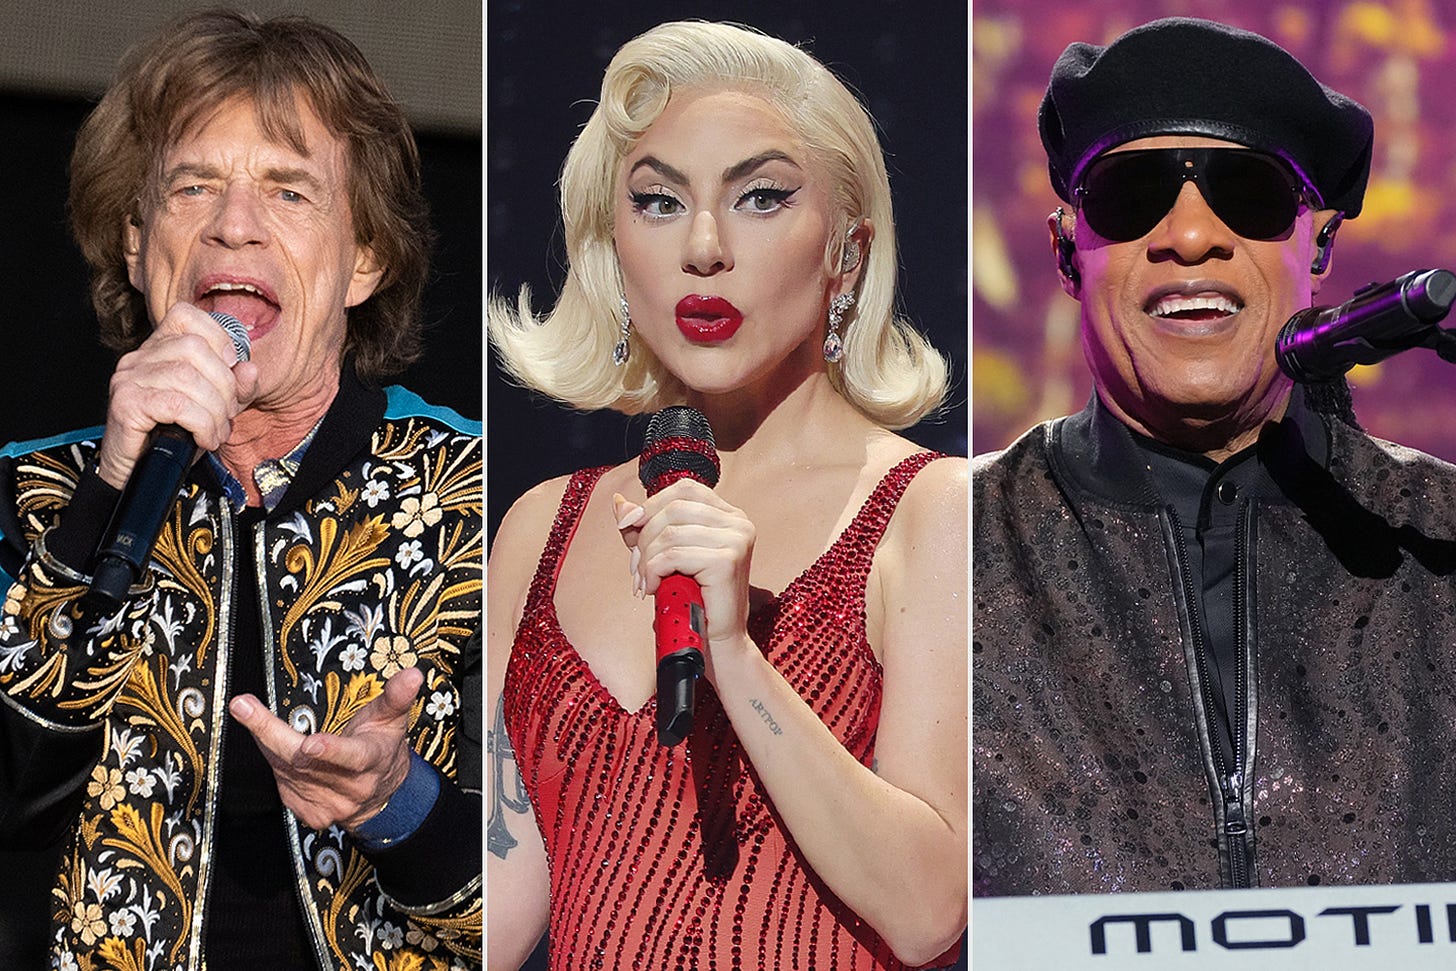 Hear the new Rolling Stones song featuring Lady Gaga, Stevie Wonder | EW.com